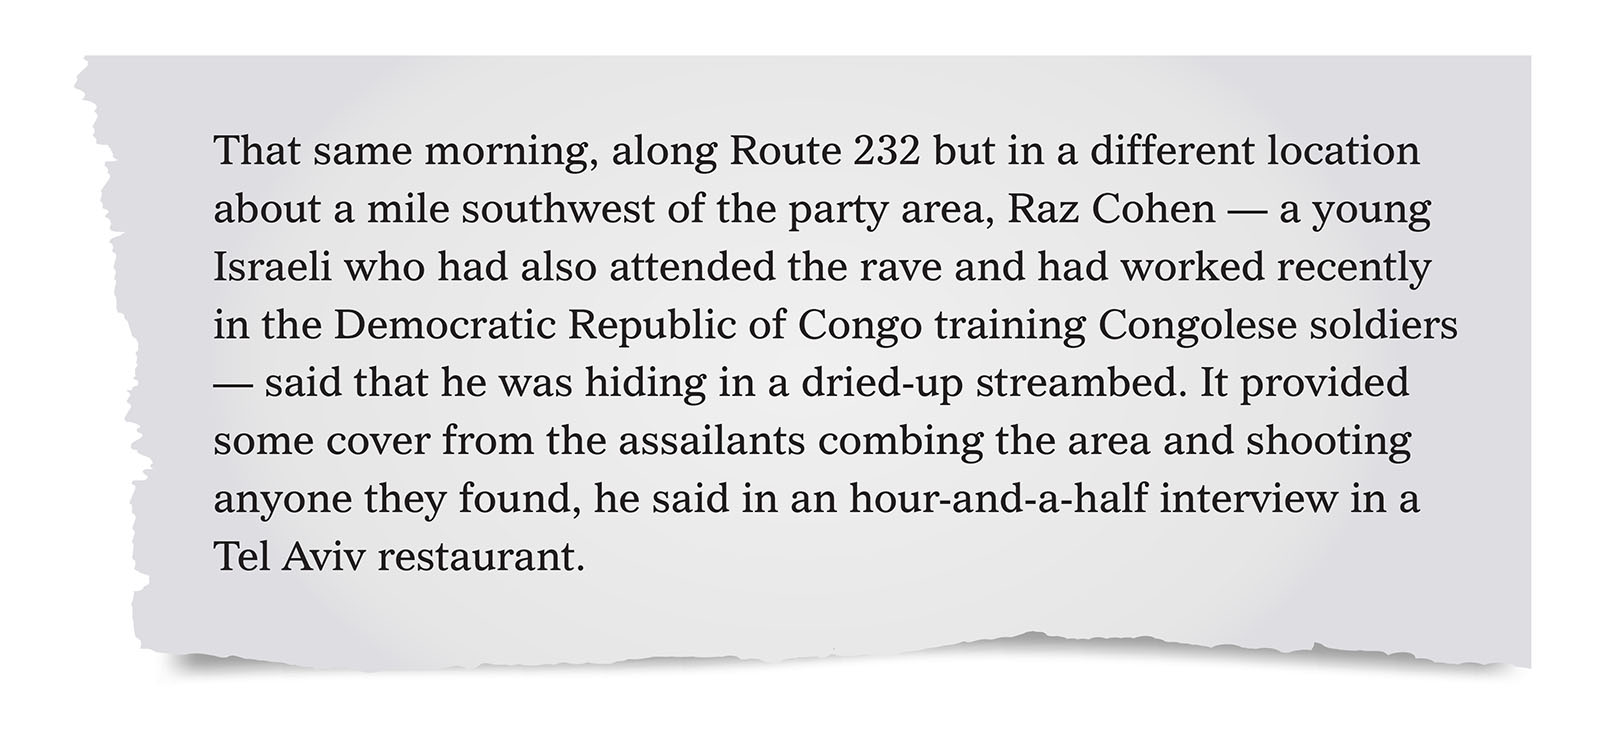 Pull quote:
That same morning, along Route 232 but in a different location about a mile southwest of the party area, Raz Cohen — a young Israeli who had also attended the rave and had worked recently in the Democratic Republic of Congo training Congolese soldiers — said that he was hiding in a dried-up streambed. [...] Maybe 40 yards in front of him, he recalled, a white van pulled up and its doors flew open. He said he then saw five men, wearing civilian clothes, all carrying knives and one carrying a hammer, dragging a woman across the ground. She was young, naked and screaming. “They all gather around her,” Mr. Cohen said. “She’s standing up. They start raping her. I saw the men standing in a half circle around her. One penetrates her. She screams. I still remember her voice, screams without words.” “Then one of them raises a knife,” he said, “and they just slaughtered her.”